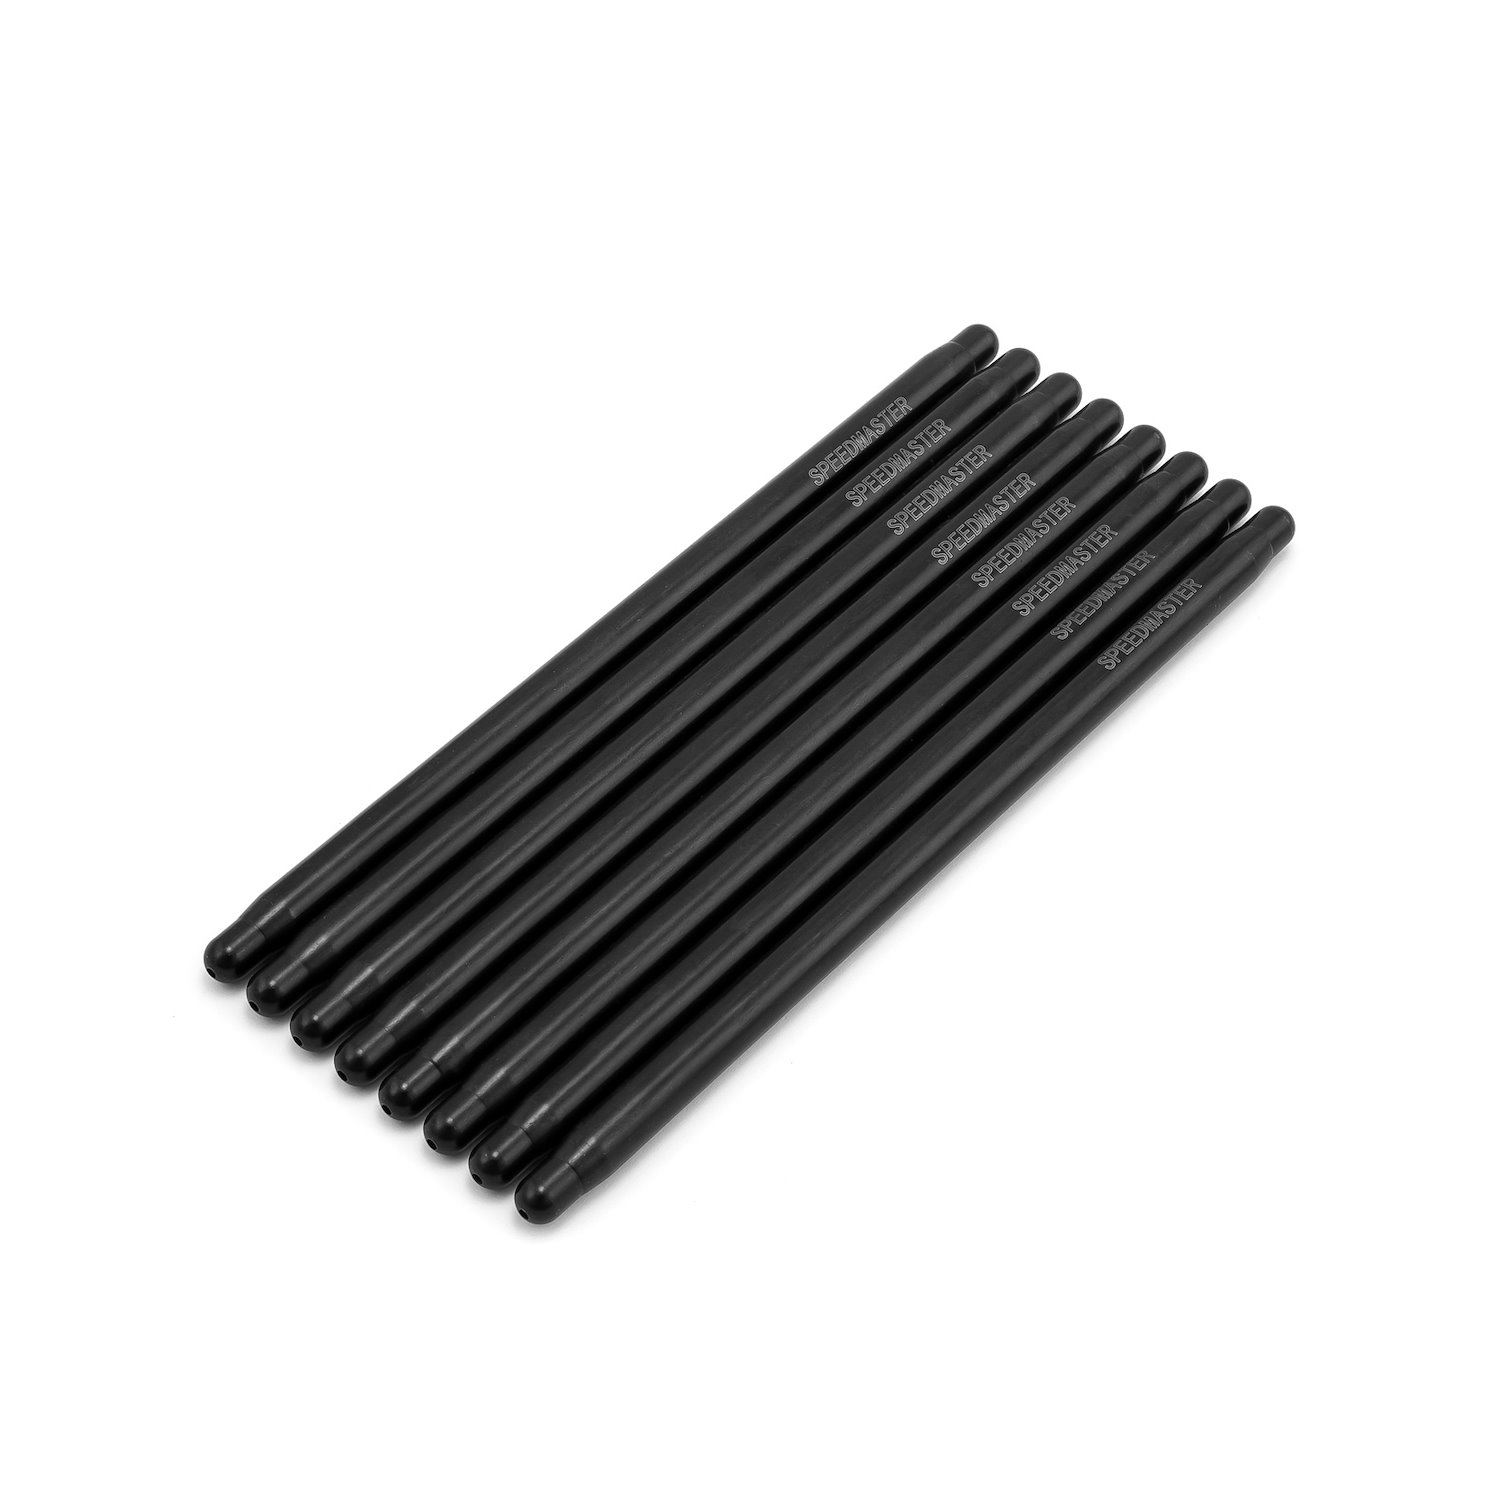 1-254-038 9.350 in. Chromoly Heat-Treated 3/8 in. 0.080 in. Wall DNA One-Piece Pushrods